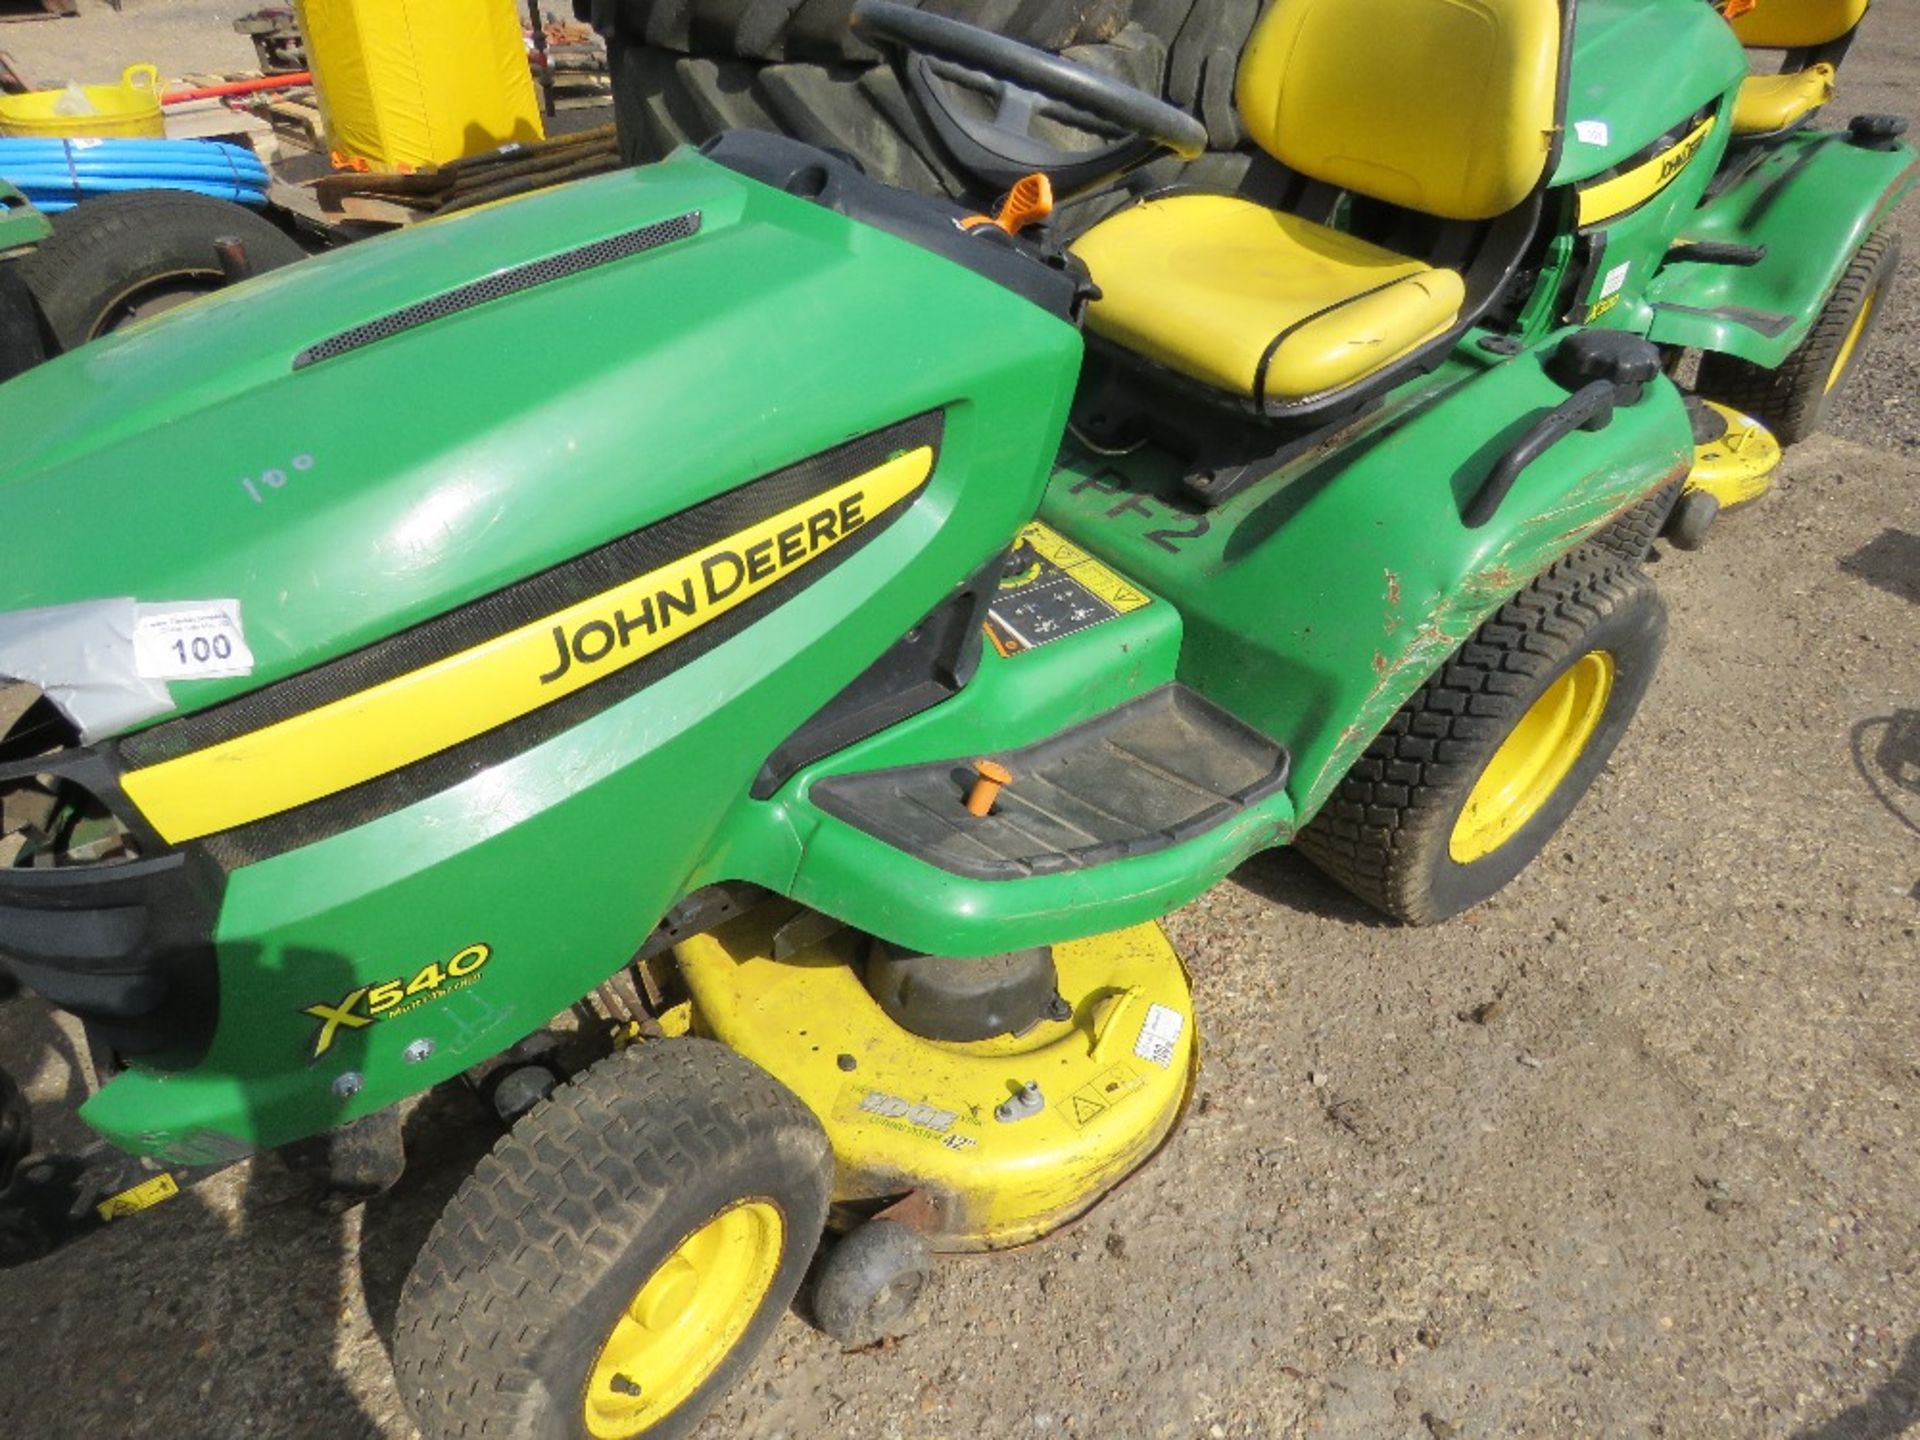 JOHN DEERE X540 PROFESSIONAL RIDE ON PETROL MOWER. PREVIOUS COUNCIL USEAGE. STRAIGHT FROM STORAGE, - Image 2 of 5